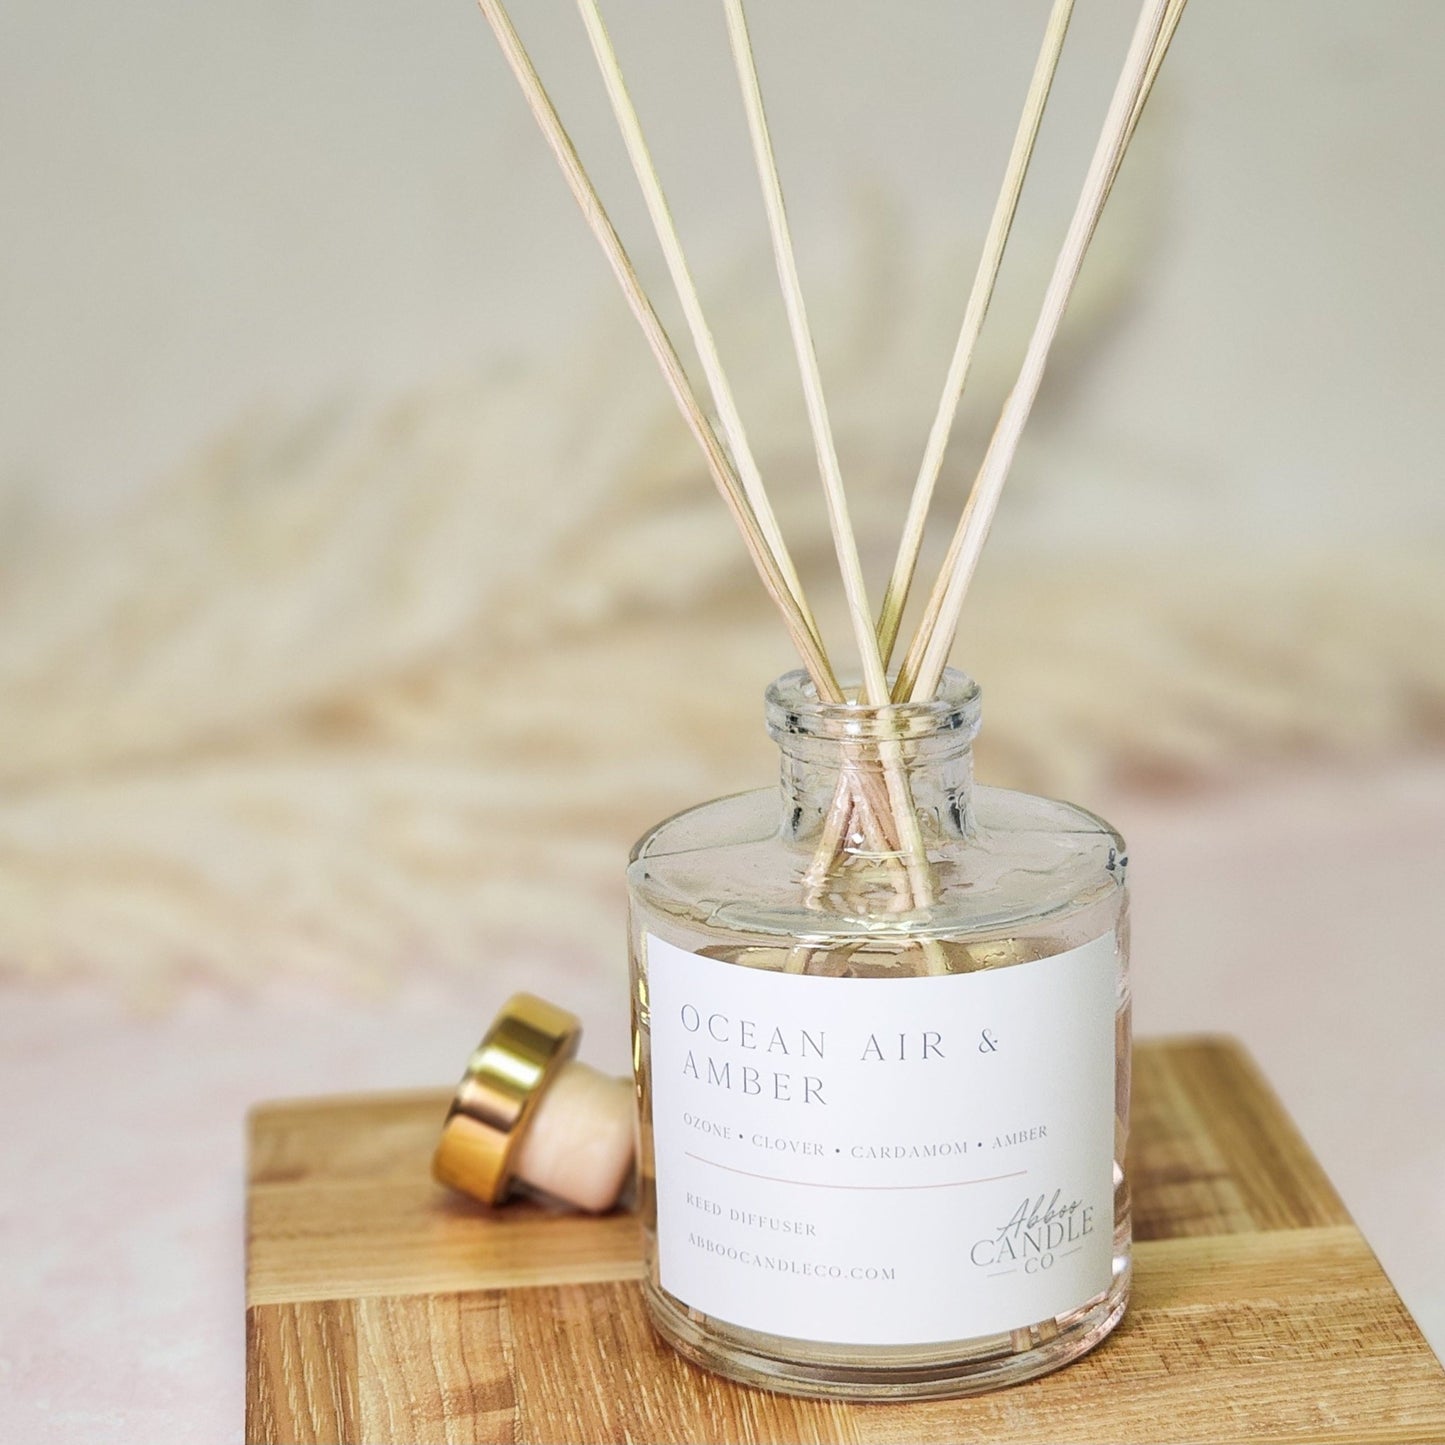 Ocean Air and Amber Reed Diffuser - Abboo Candle Co